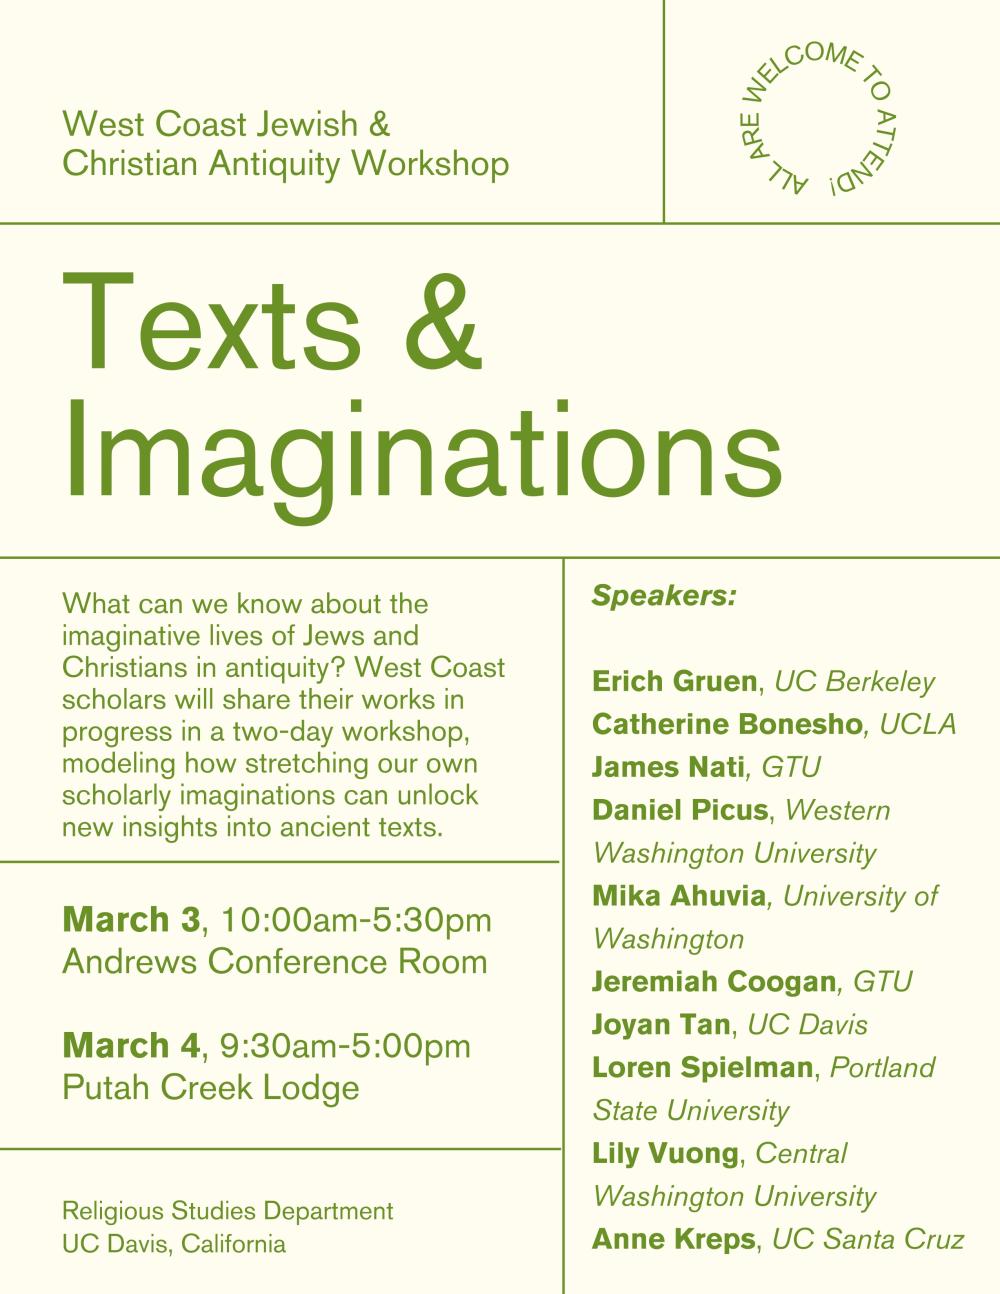 A flyer for the upcoming Texts & Imaginations events, including a list of speakers